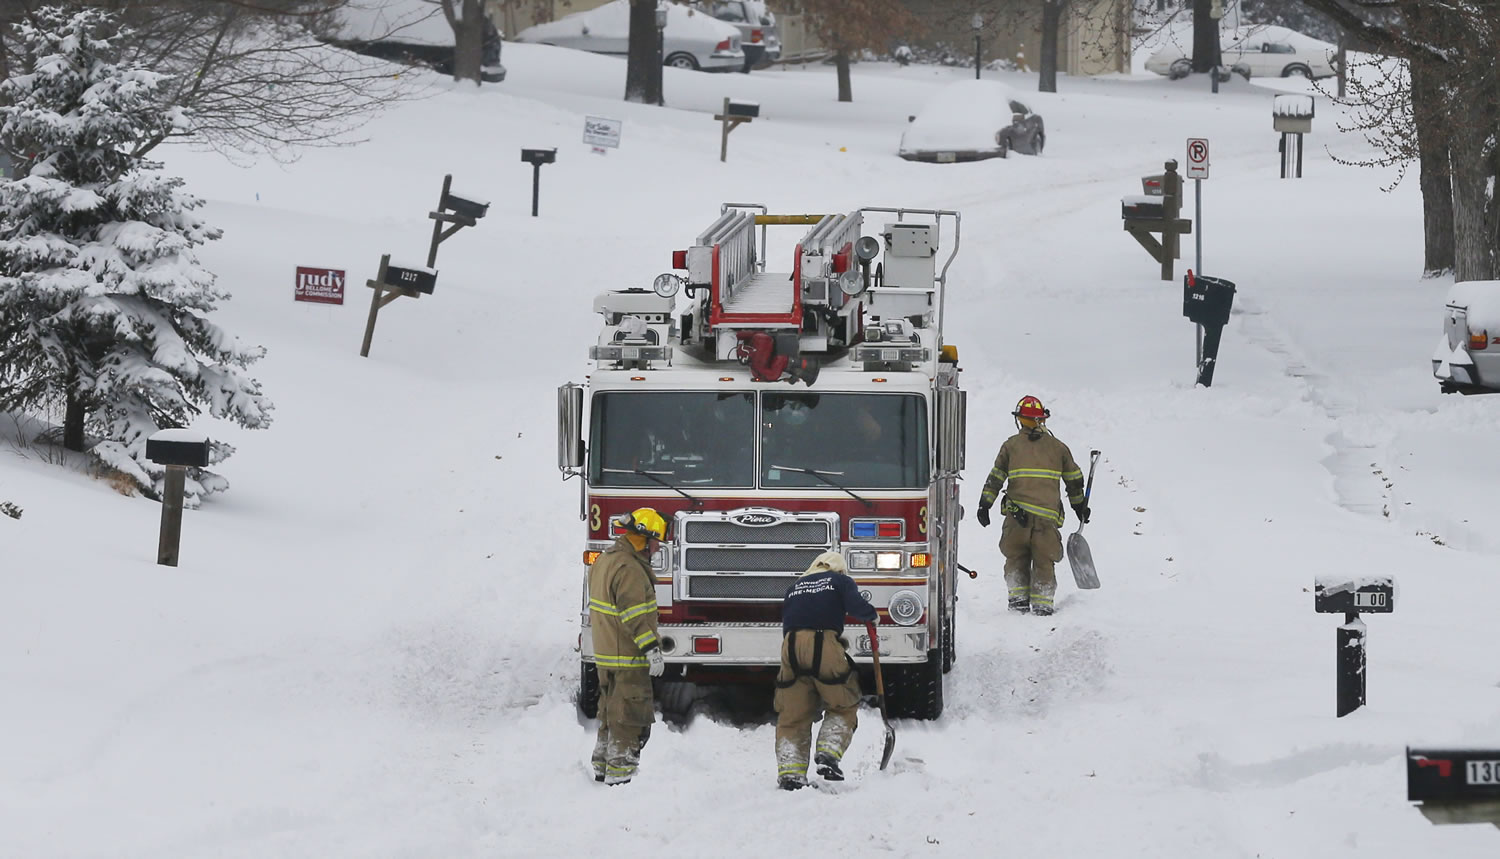 Lawrence firefighters shovel as they back out of a snow -overed neighborhood in Lawrence, Kan. on Thursday.